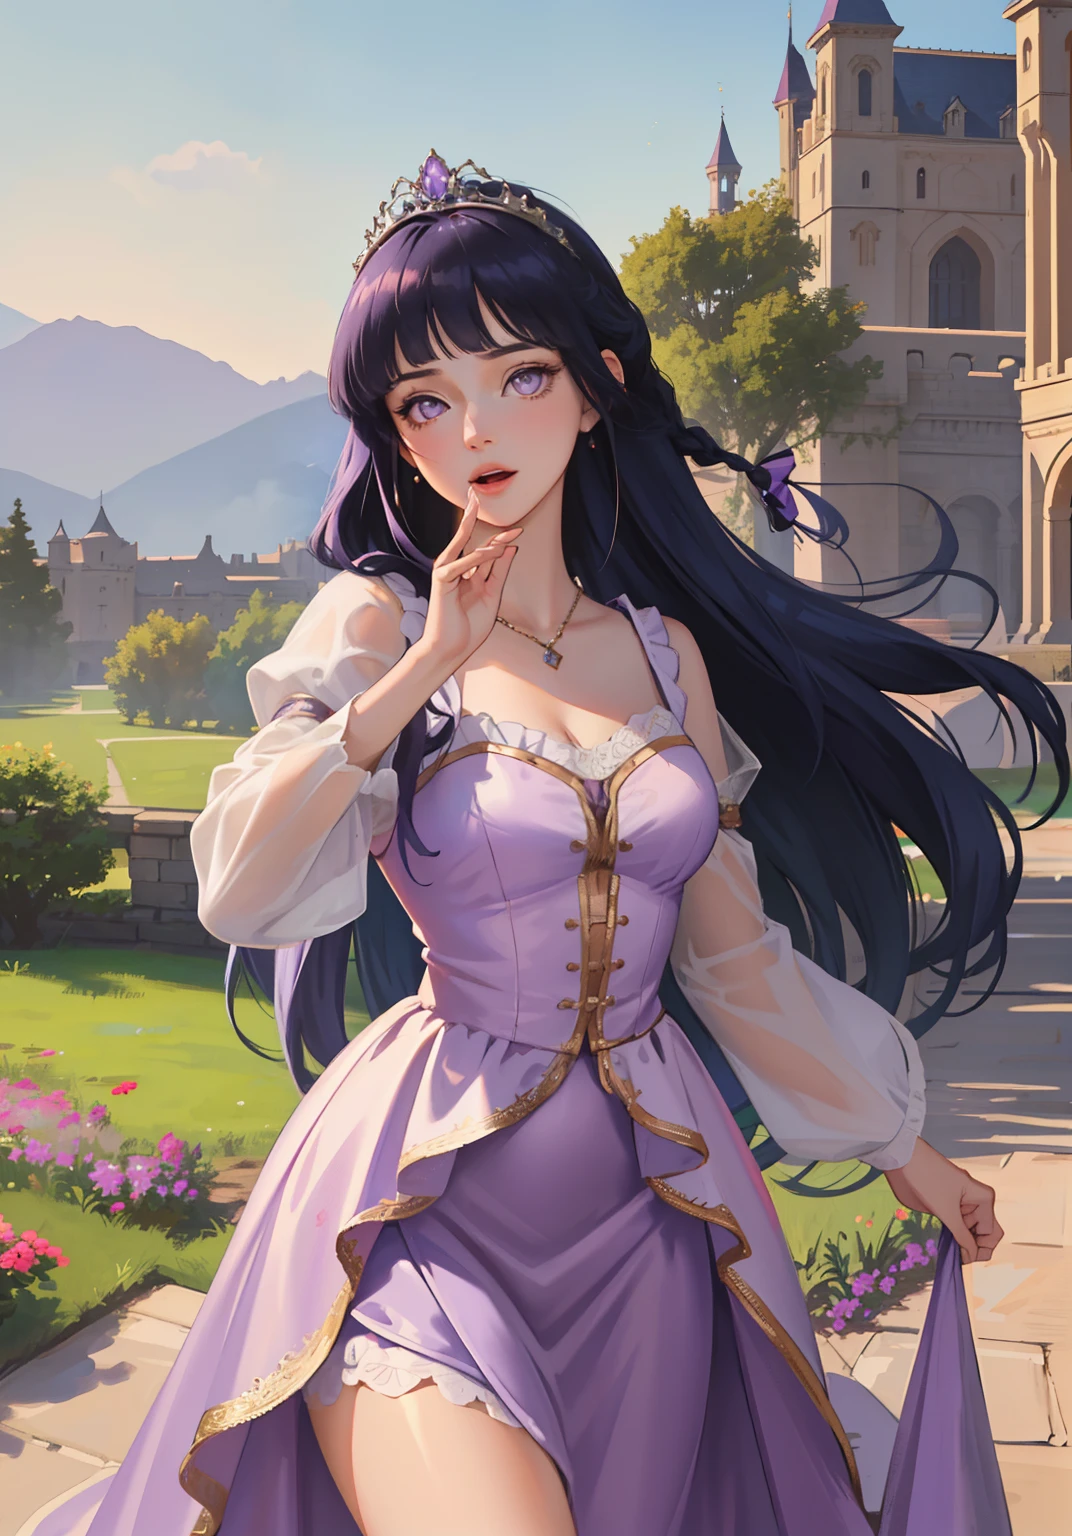 (RapunzelWaifu:1), surprised, beautiful pose, looking at the viewer, thick thighs, (long soft purple dress:1.2), (very long hair, tiara) :D,braid,

(realistic: 1.2), (realism), (masterpiece: 1.2), (best quality), (ultra detailed), (8k, 4k, intricate), (full-body-shot: 1), (Cowboy-shot: 1.2), (85mm), light particles, lighting, (highly detailed: 1.2), (detailed face: 1.2), (gradients), sfw, colorful, (detailed eyes: 1.2),

(detailed landscape, garden, plants, castle: 1.2), (detailed background), detailed landscape, (dynamic angle: 1.2), (dynamic pose: 1.2), (rule of third_composition: 1.3), (line of action: 1.2), wide shot, daylight, soil, Blunt Bangs, purple eyes,dark blue hair